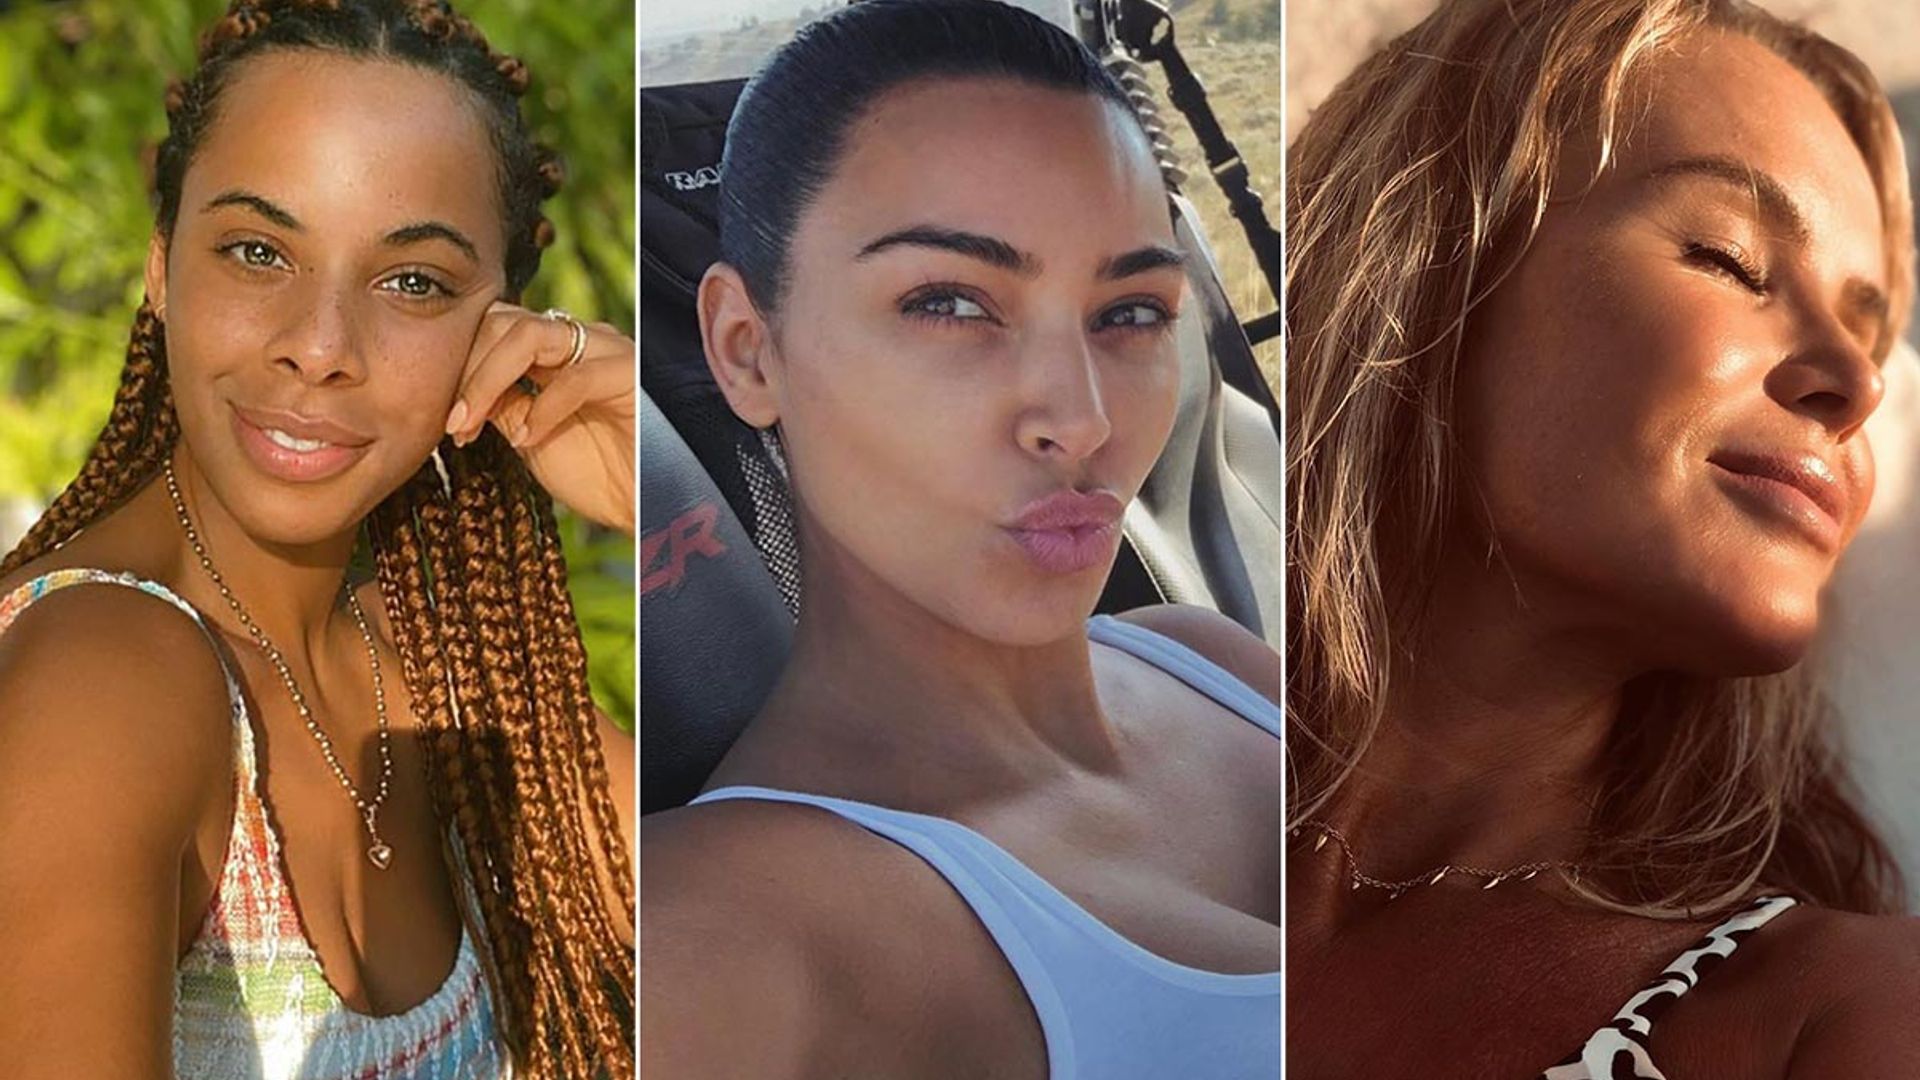 19 celebrities without makeup - see makeup-free photos Amanda Holden, Michelle Keegan and more |